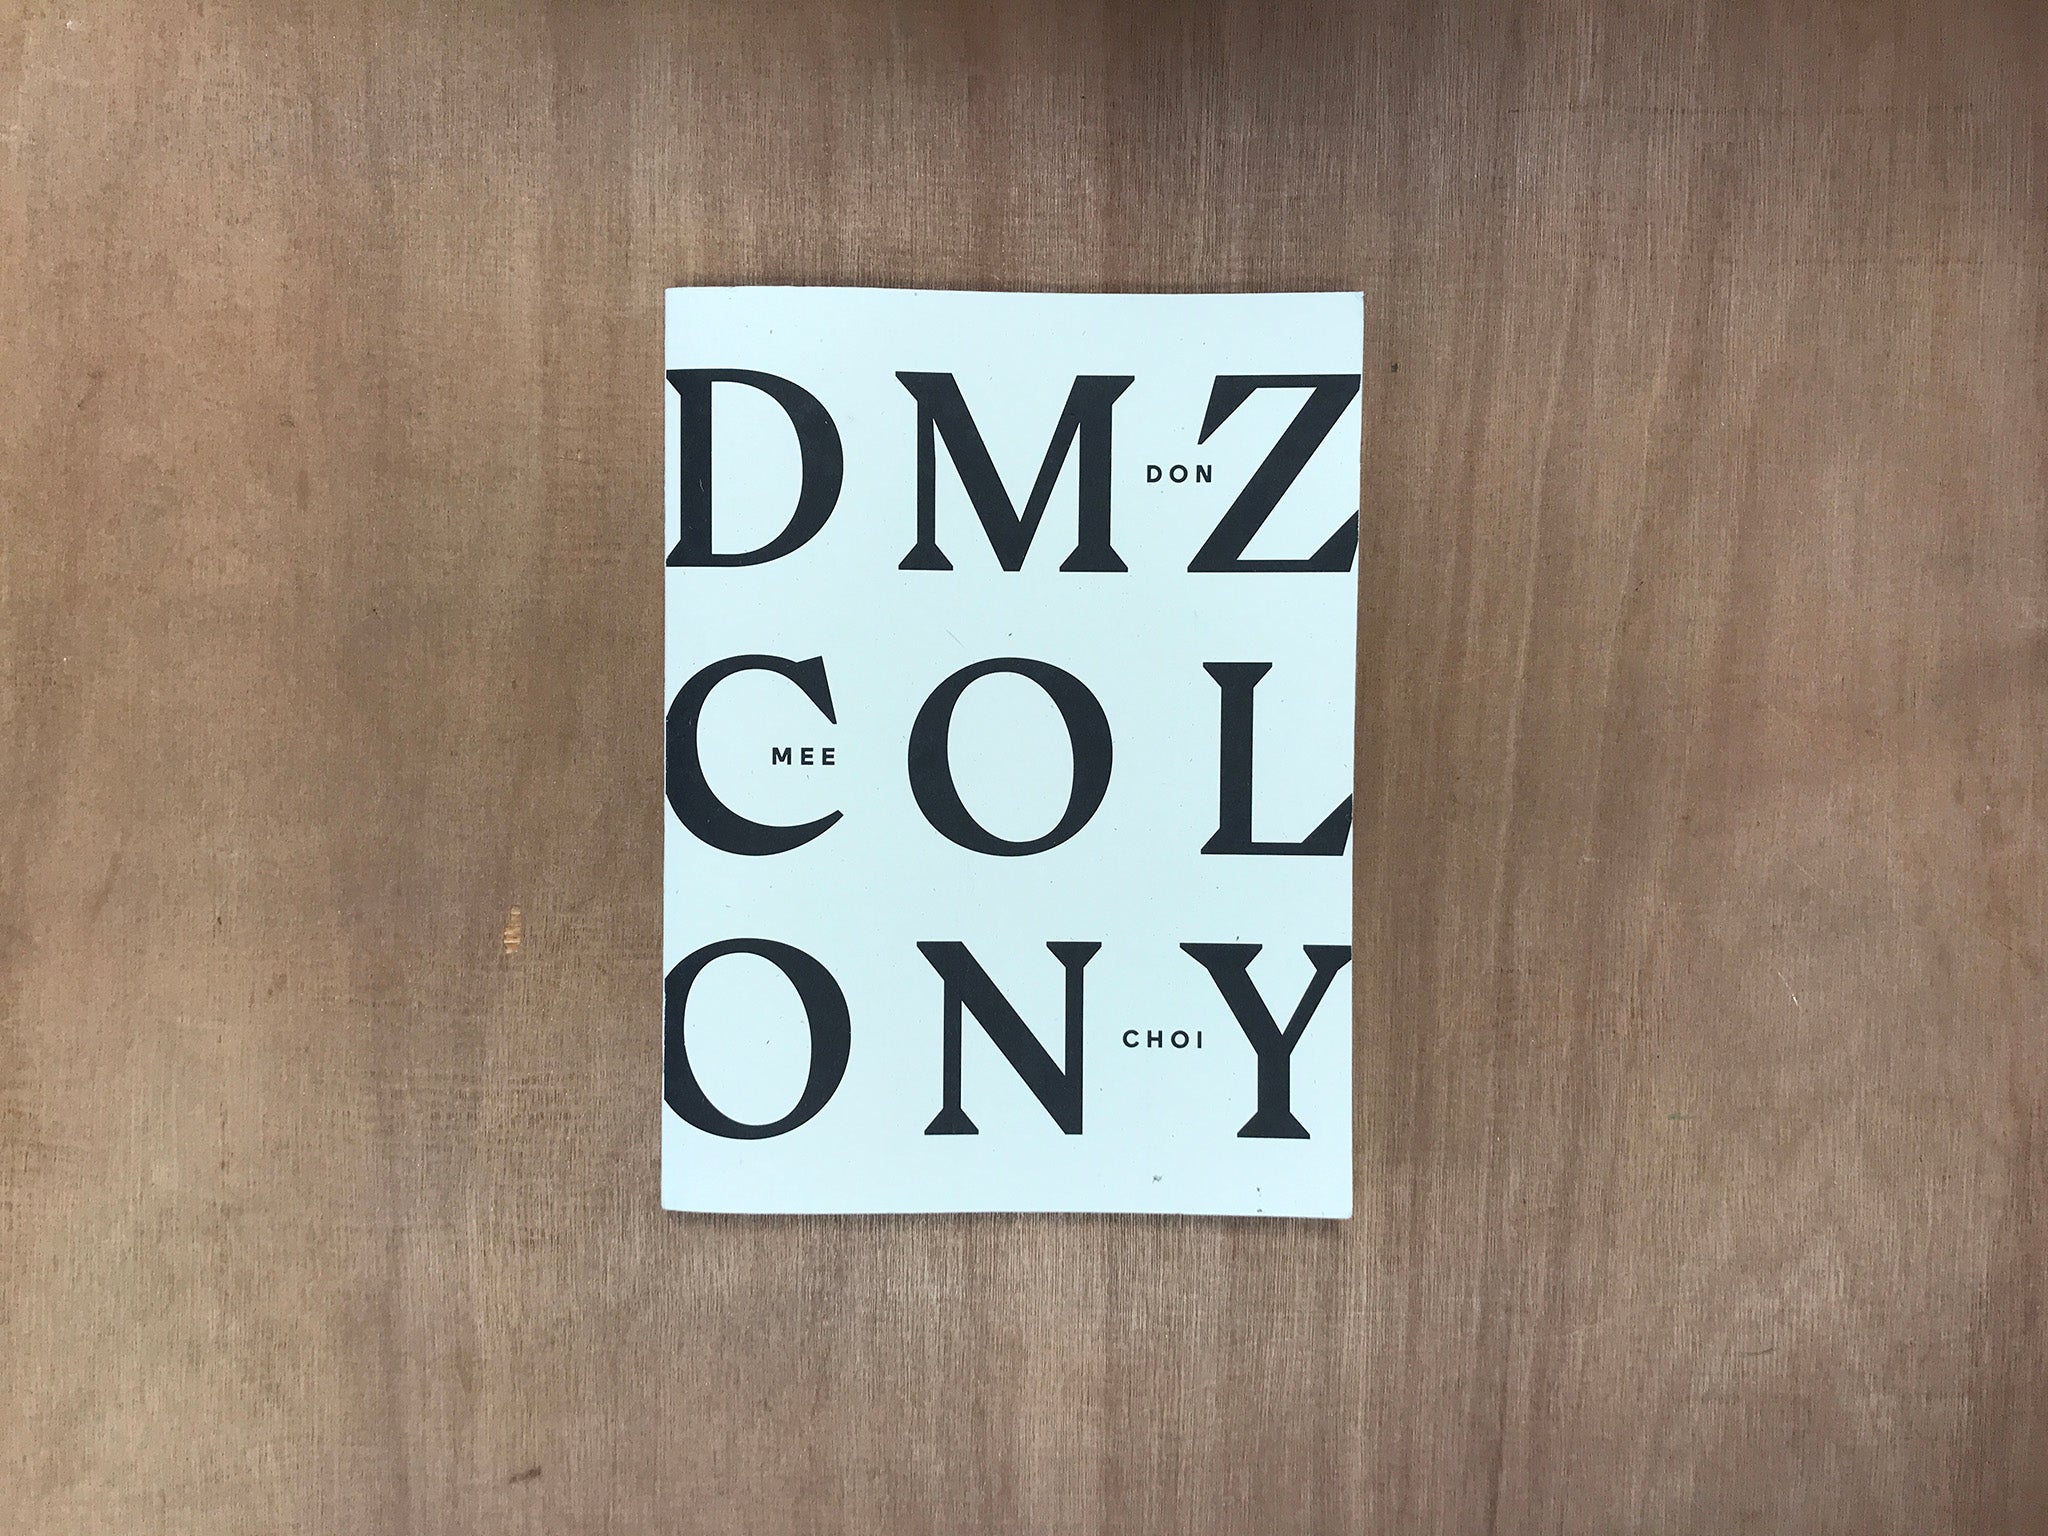 DMZ COLONY by Don Mee Choi